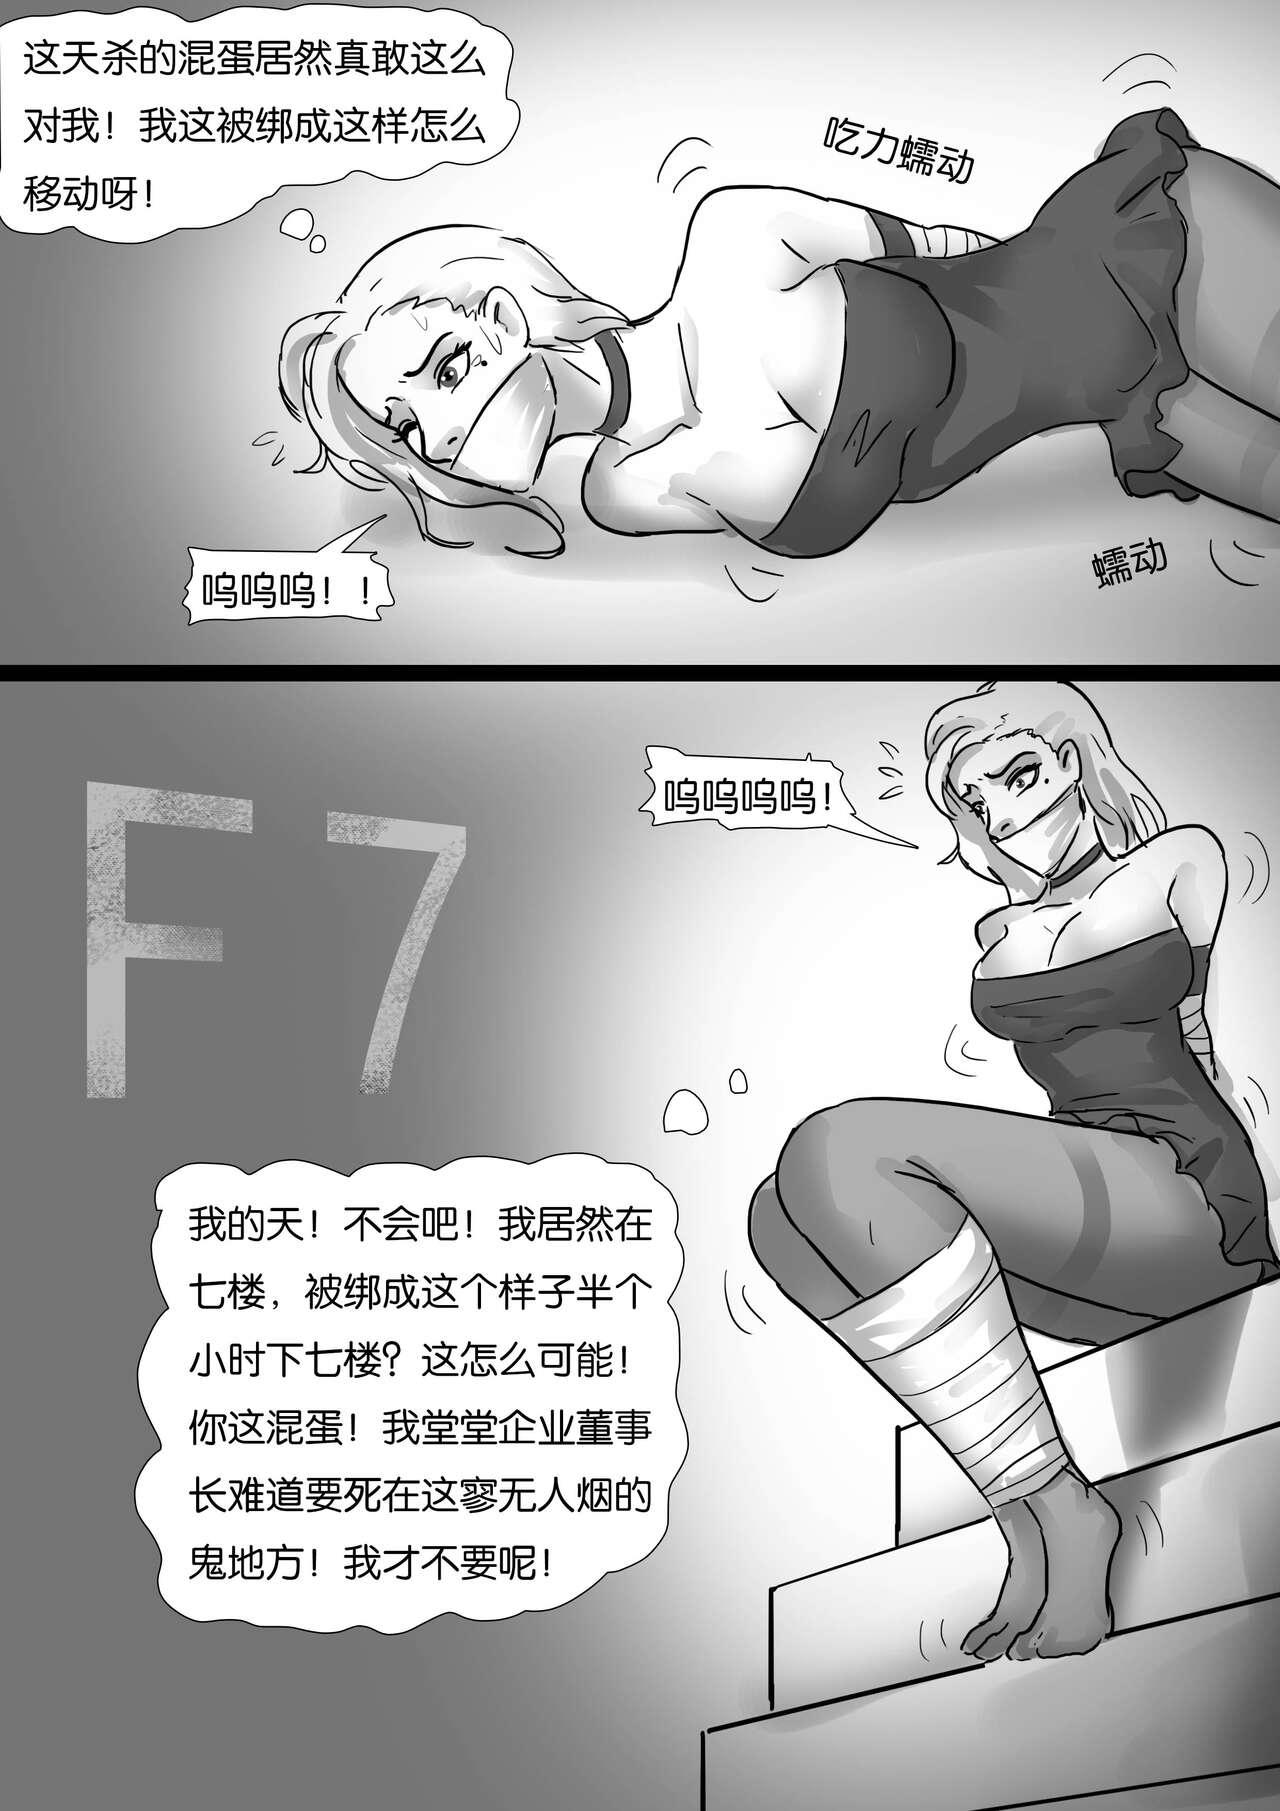 Longhair 生死时速 Time Chacing Petite Girl Porn - Page 8